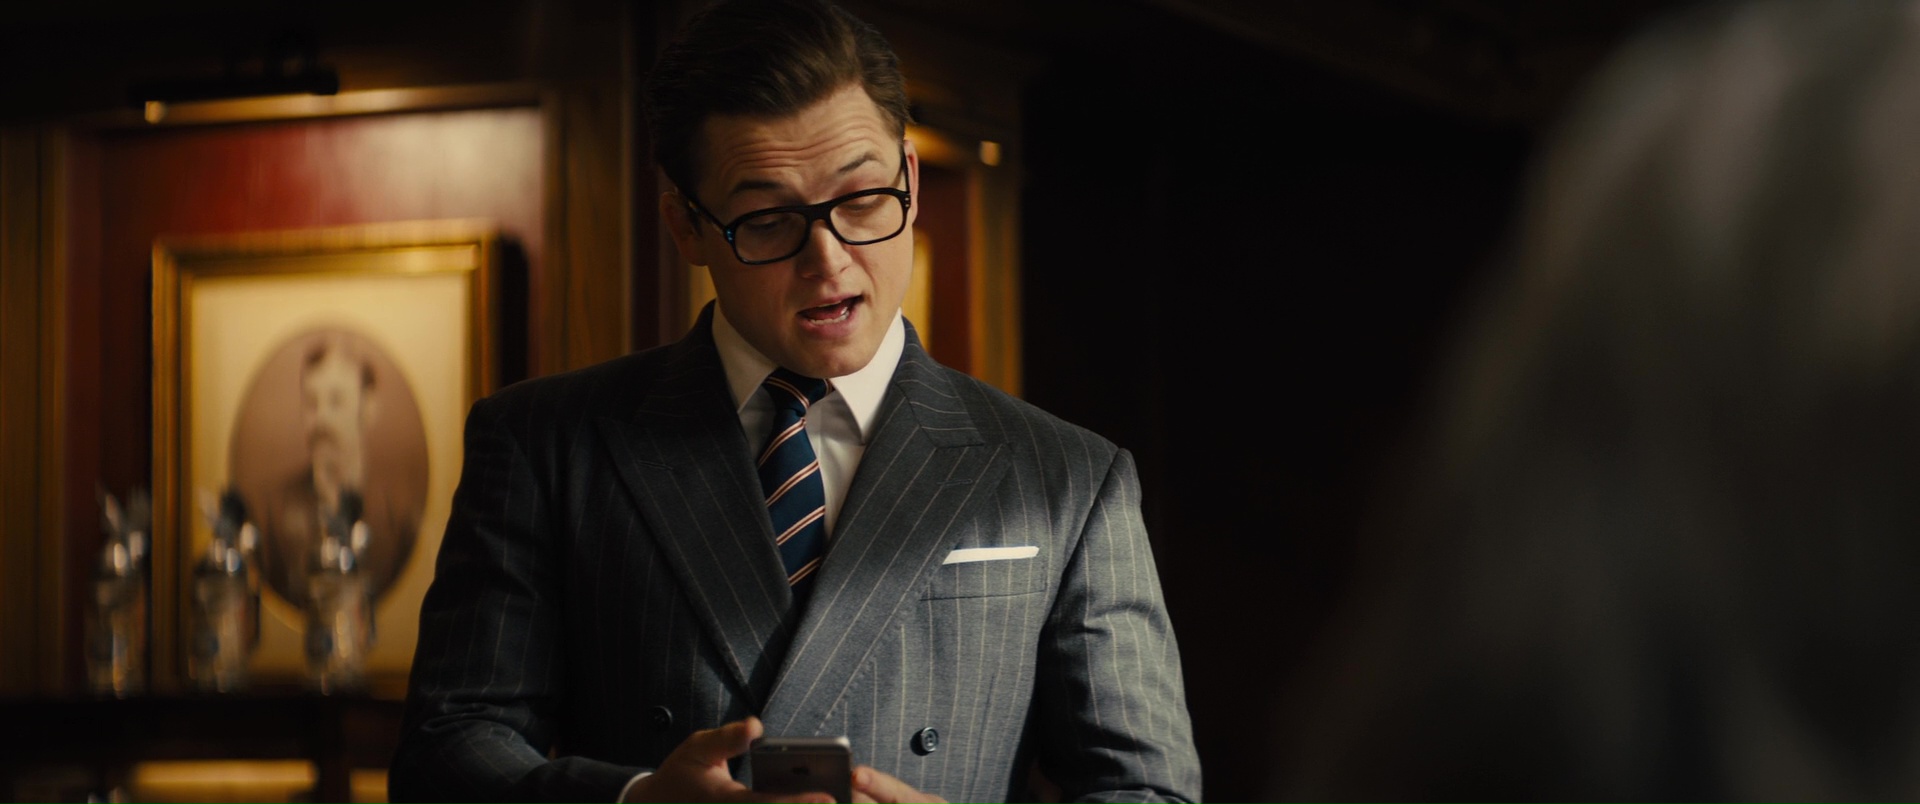 Apple iPhone Used by Taron Egerton in Kingsman 2: The Golden Circle (2017) Movie1920 x 804